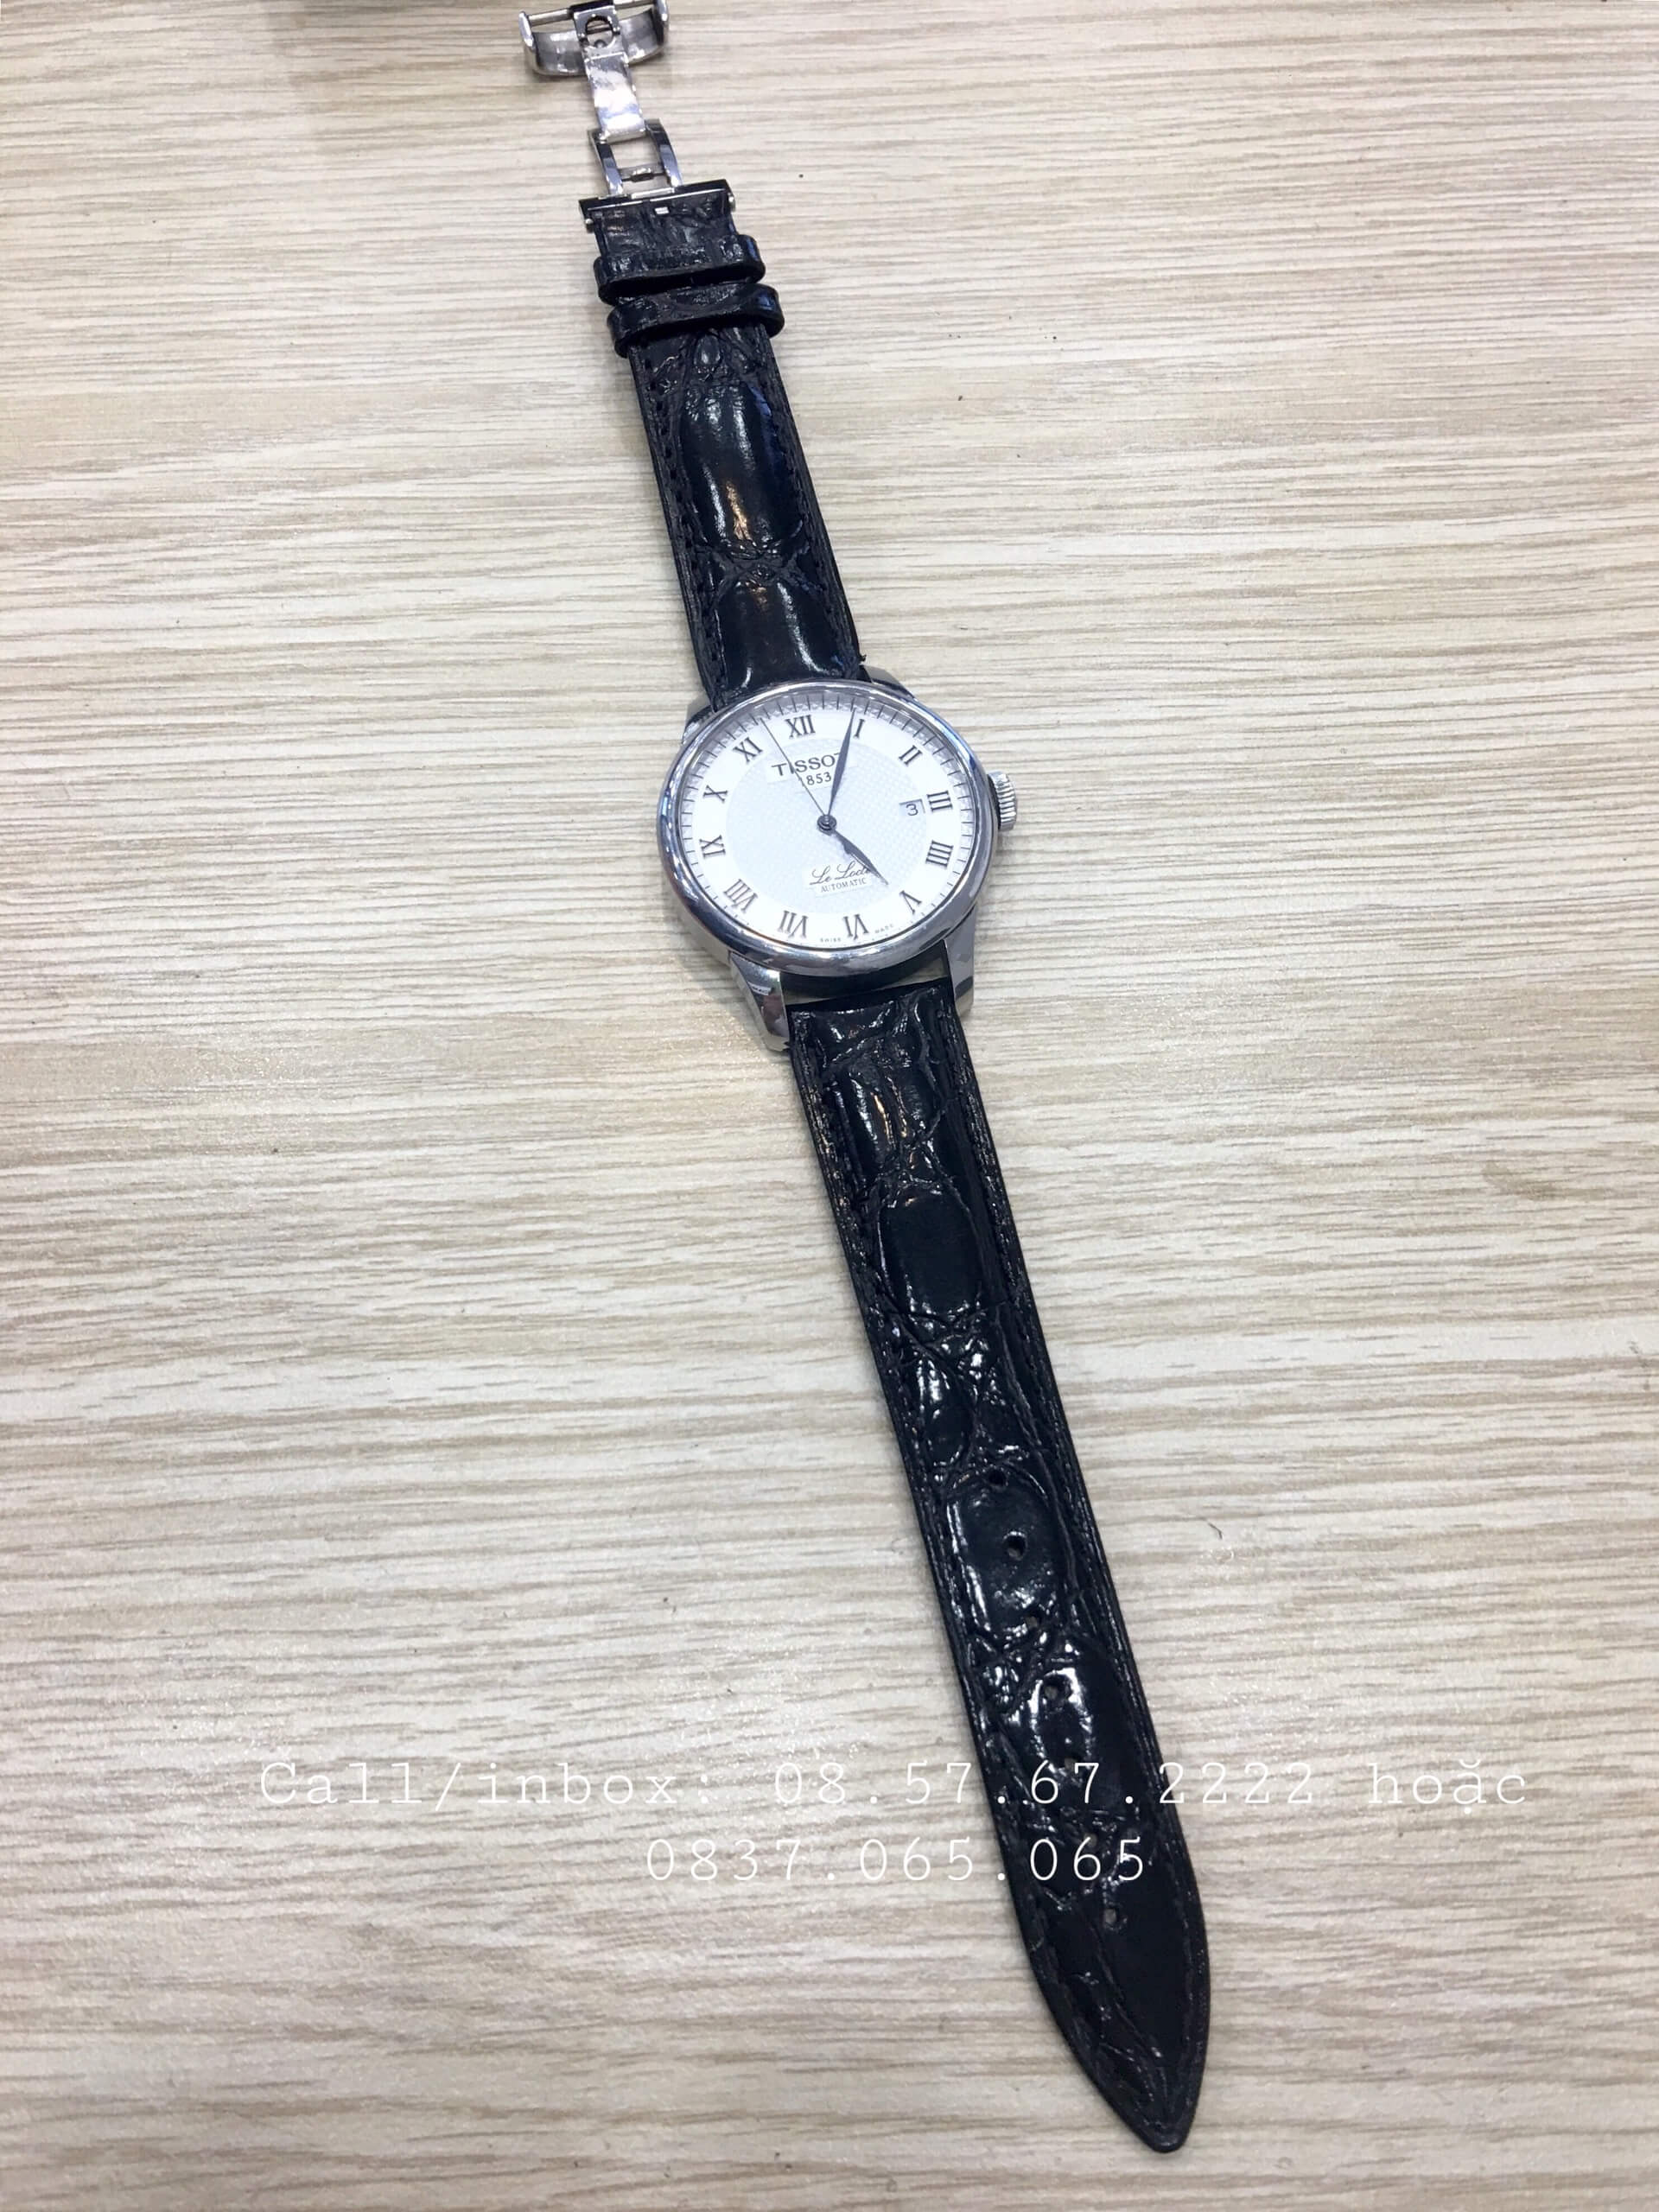 cach phoi day deo dong ho tissot 1989W5